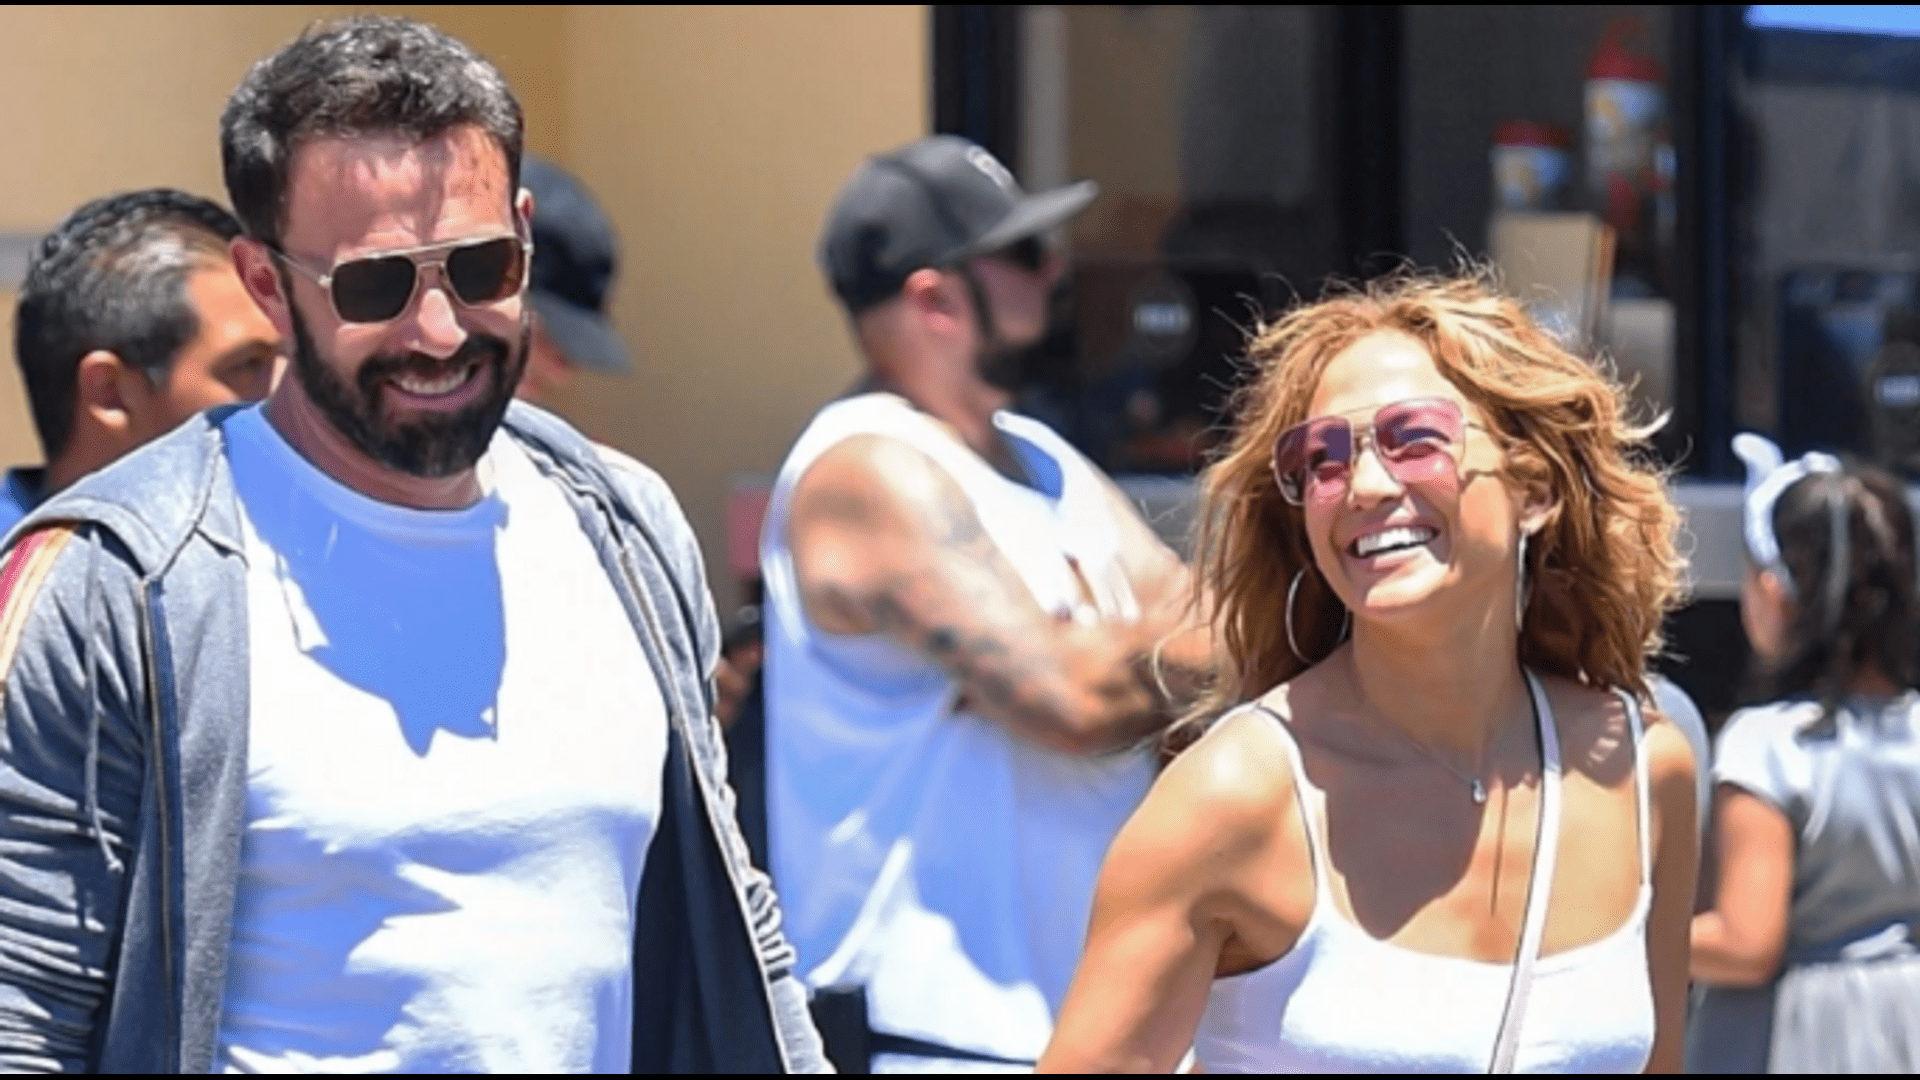 ”jennifer-lopez-and-ben-affleck-plan-to-redecorate-their-new-bel-air-mansion”